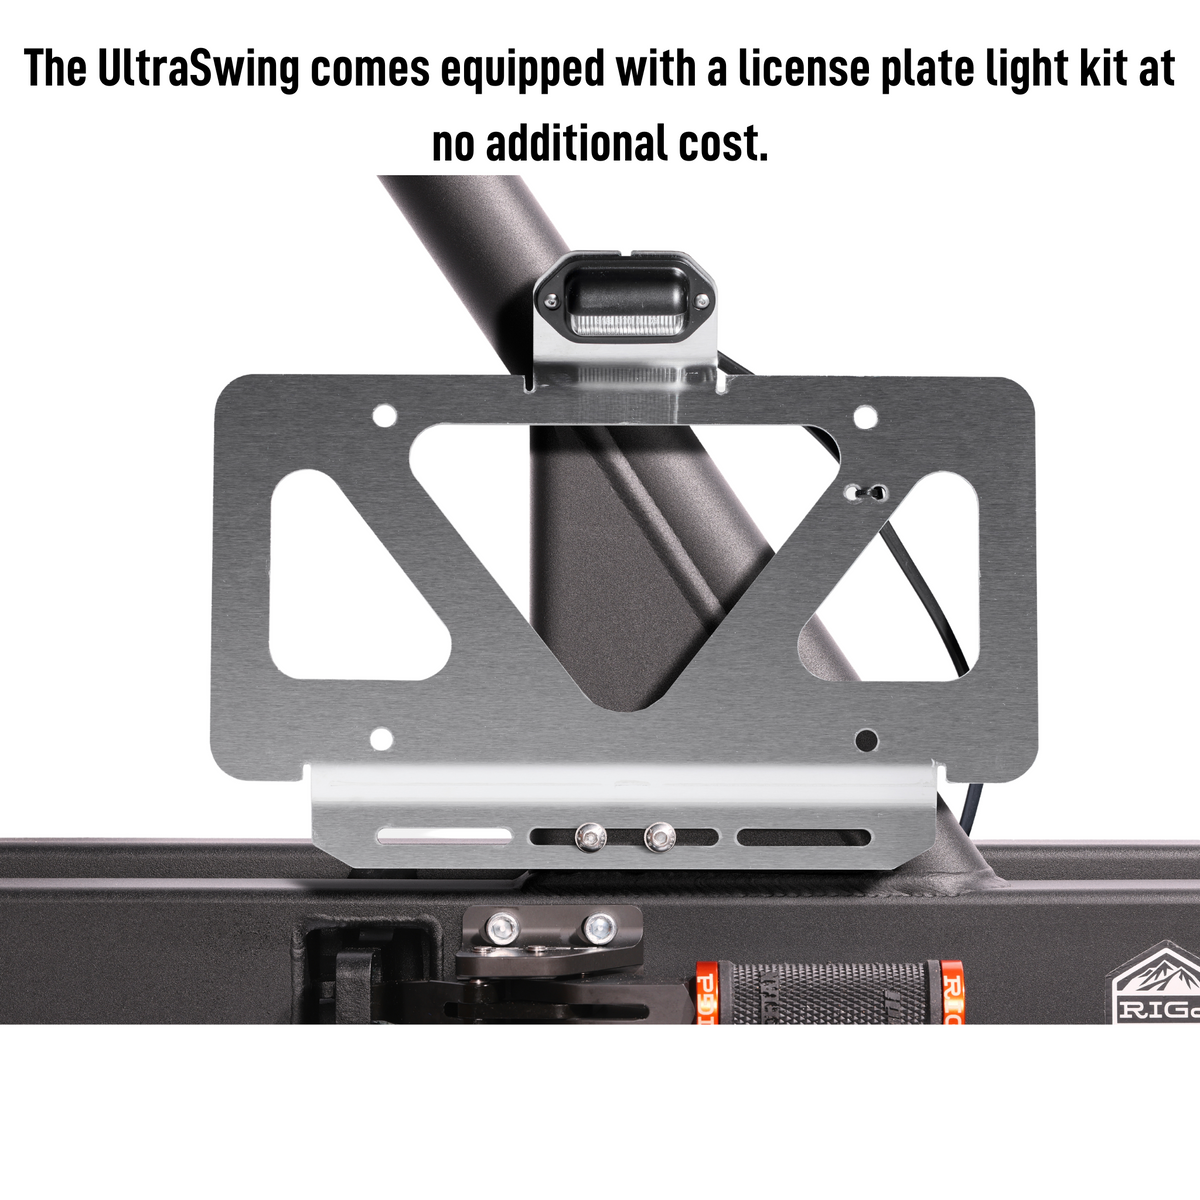 Rigd Supply UltraSwing Hitch Carrier Multi-Fit Multi-Fit 5X4.5, 5×5, 5×5.5, 6X4.5, 6×5.5, 5x100, 5X110, 5x120, 5x130, 5X150, 6X120, 6x135